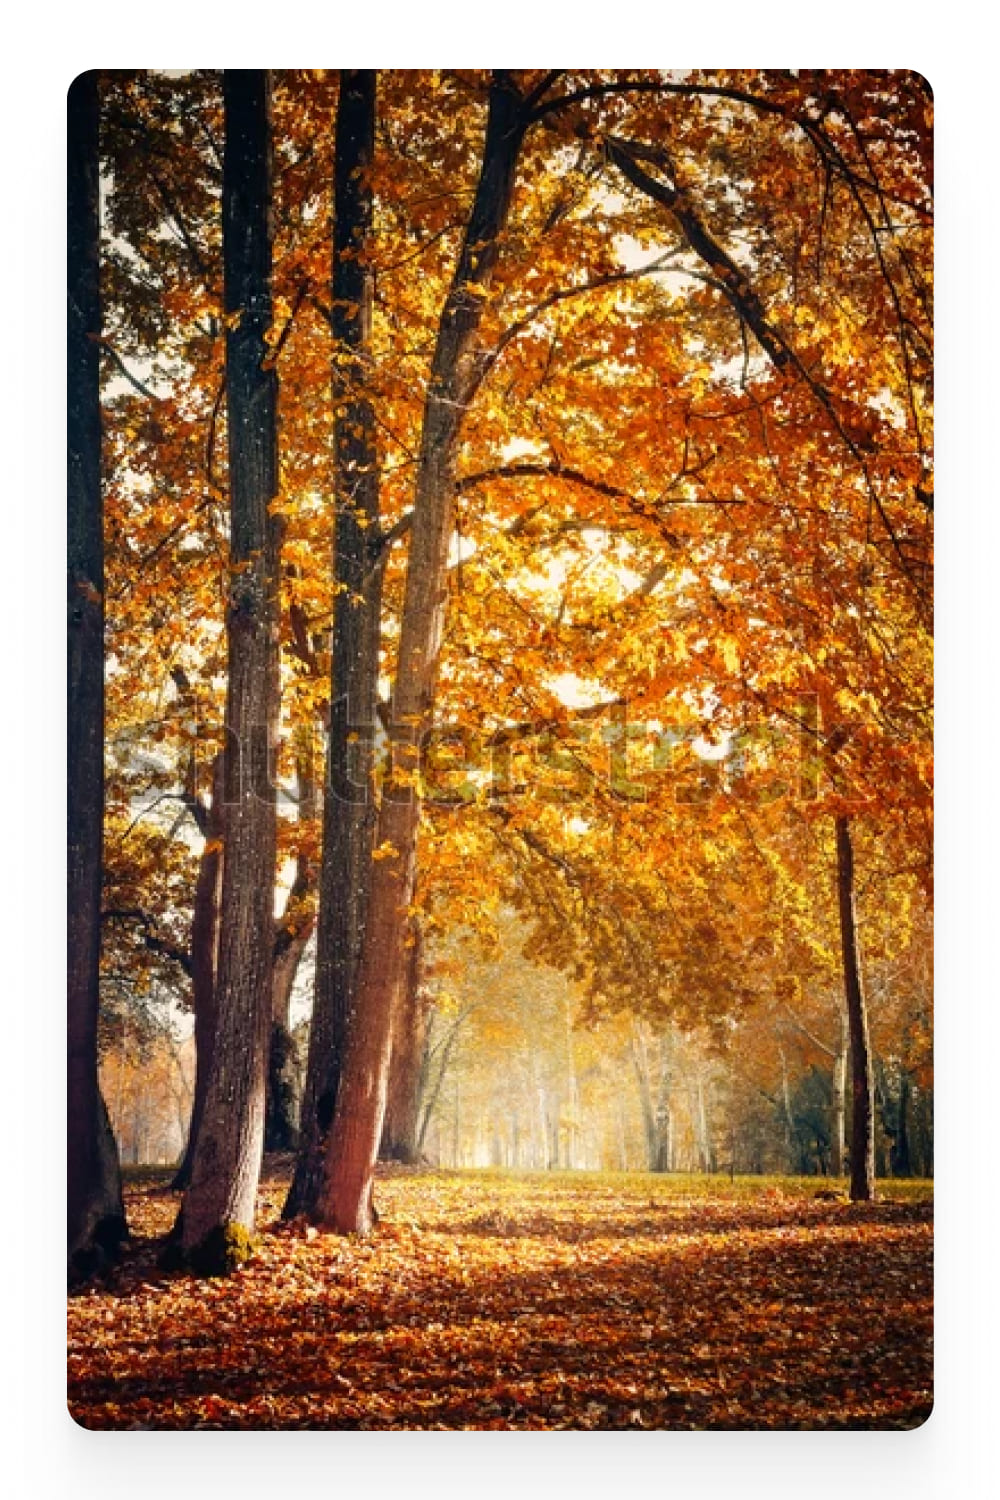 Photo of tall trees with yellowed leaves.